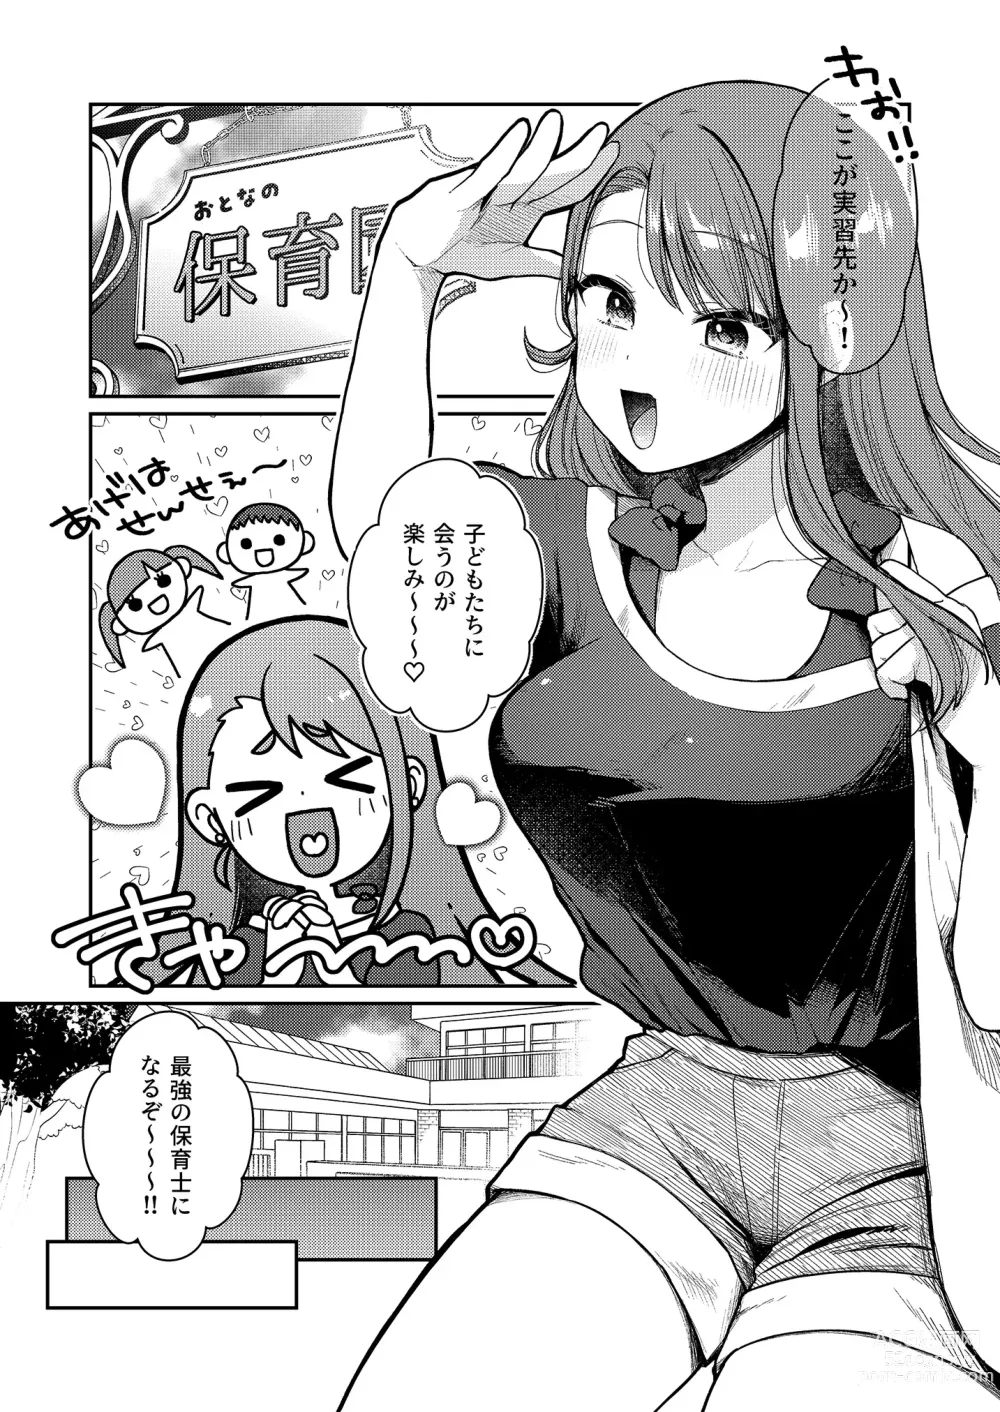 Page 3 of doujinshi Ageha tente to issho